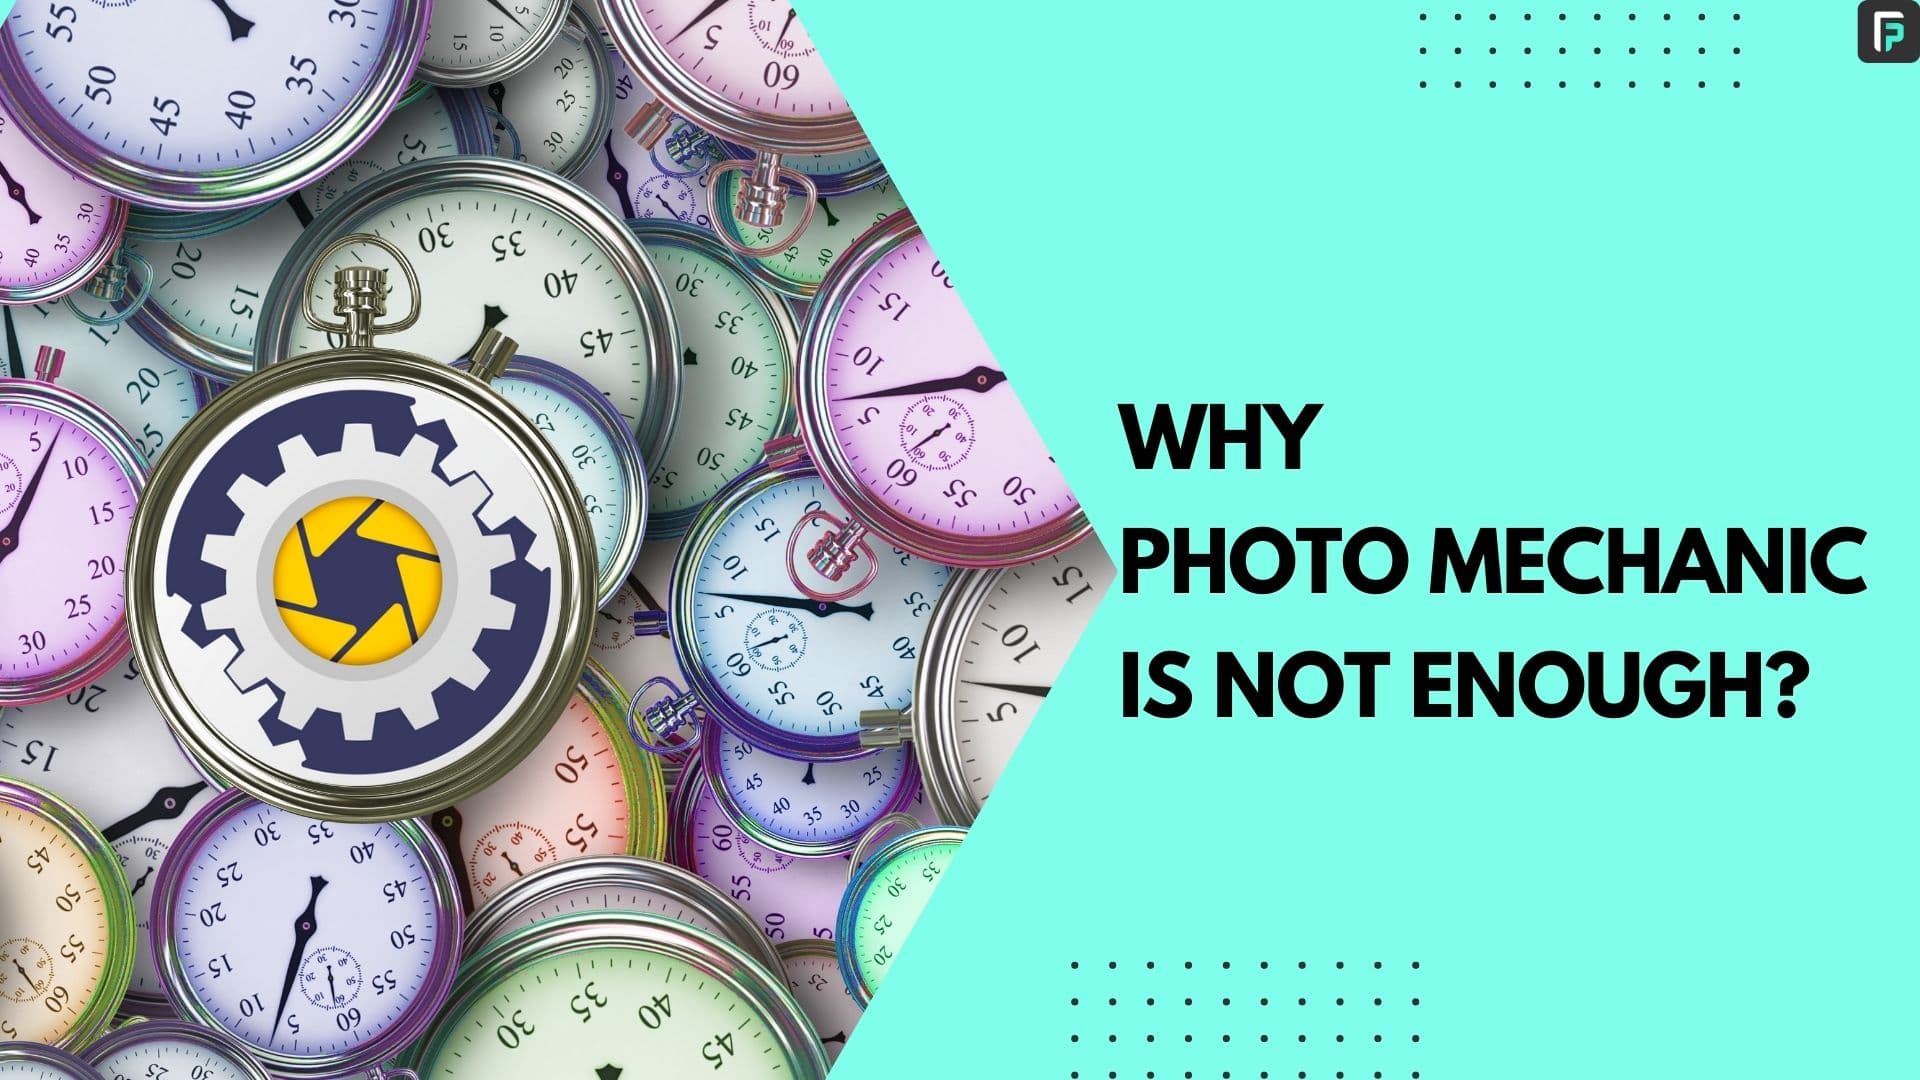 Why Photo Mechanic is Not Enough